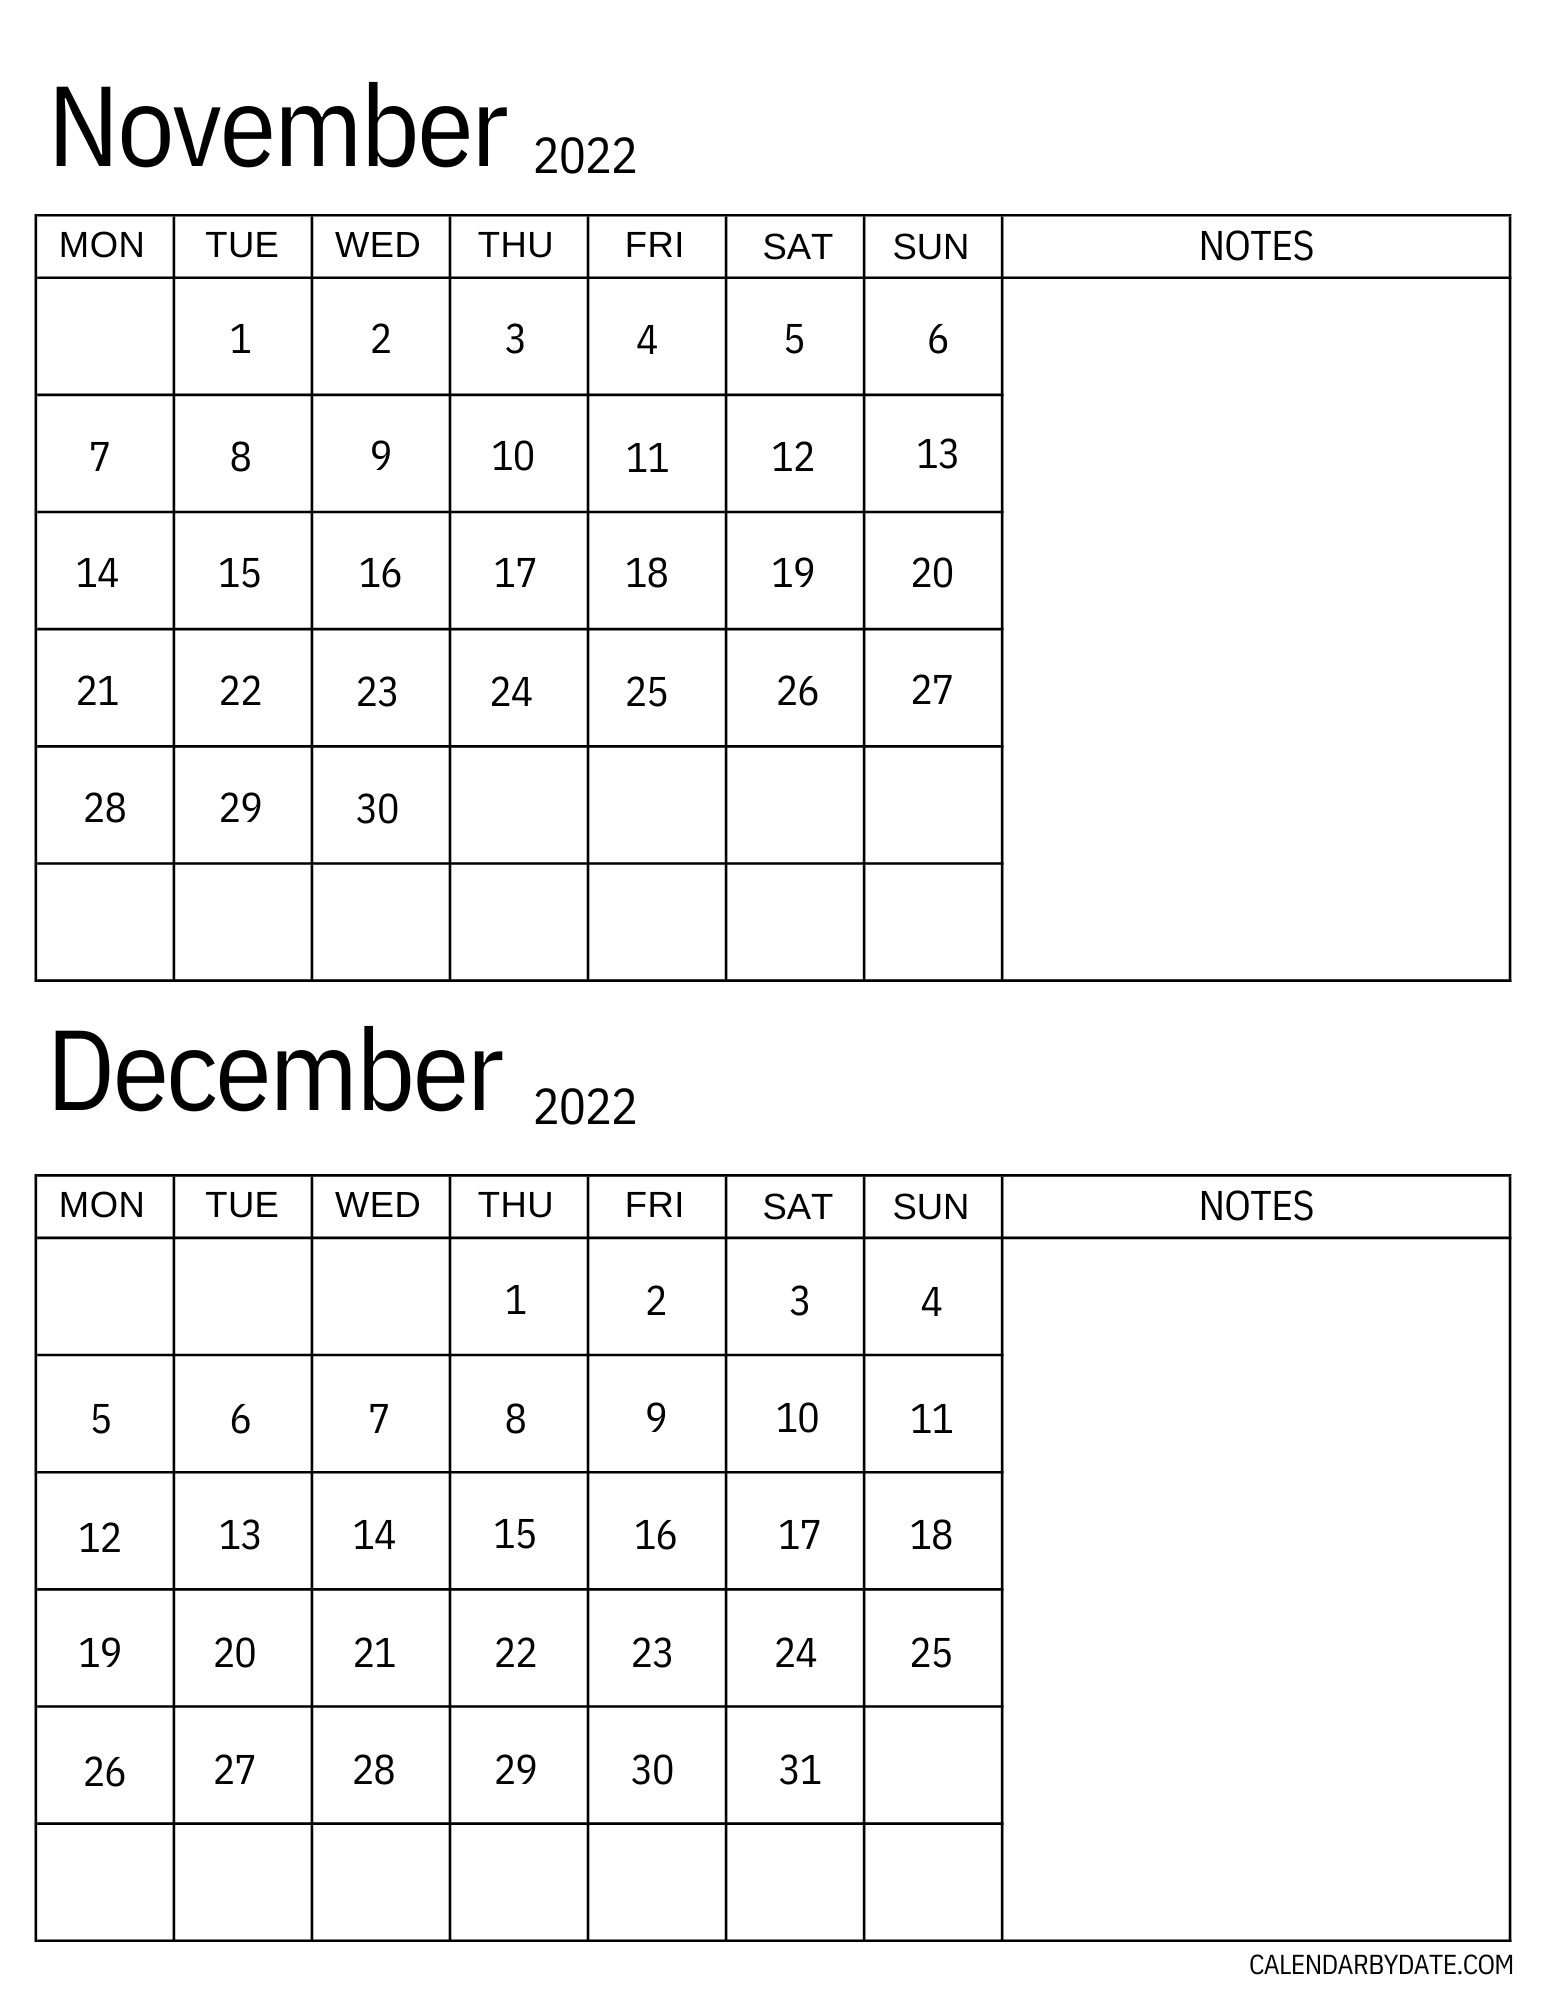 November and December 2022 calendar template in a portrait layout. Both months are laid out vertically, with some area for taking notes, events and schedules.